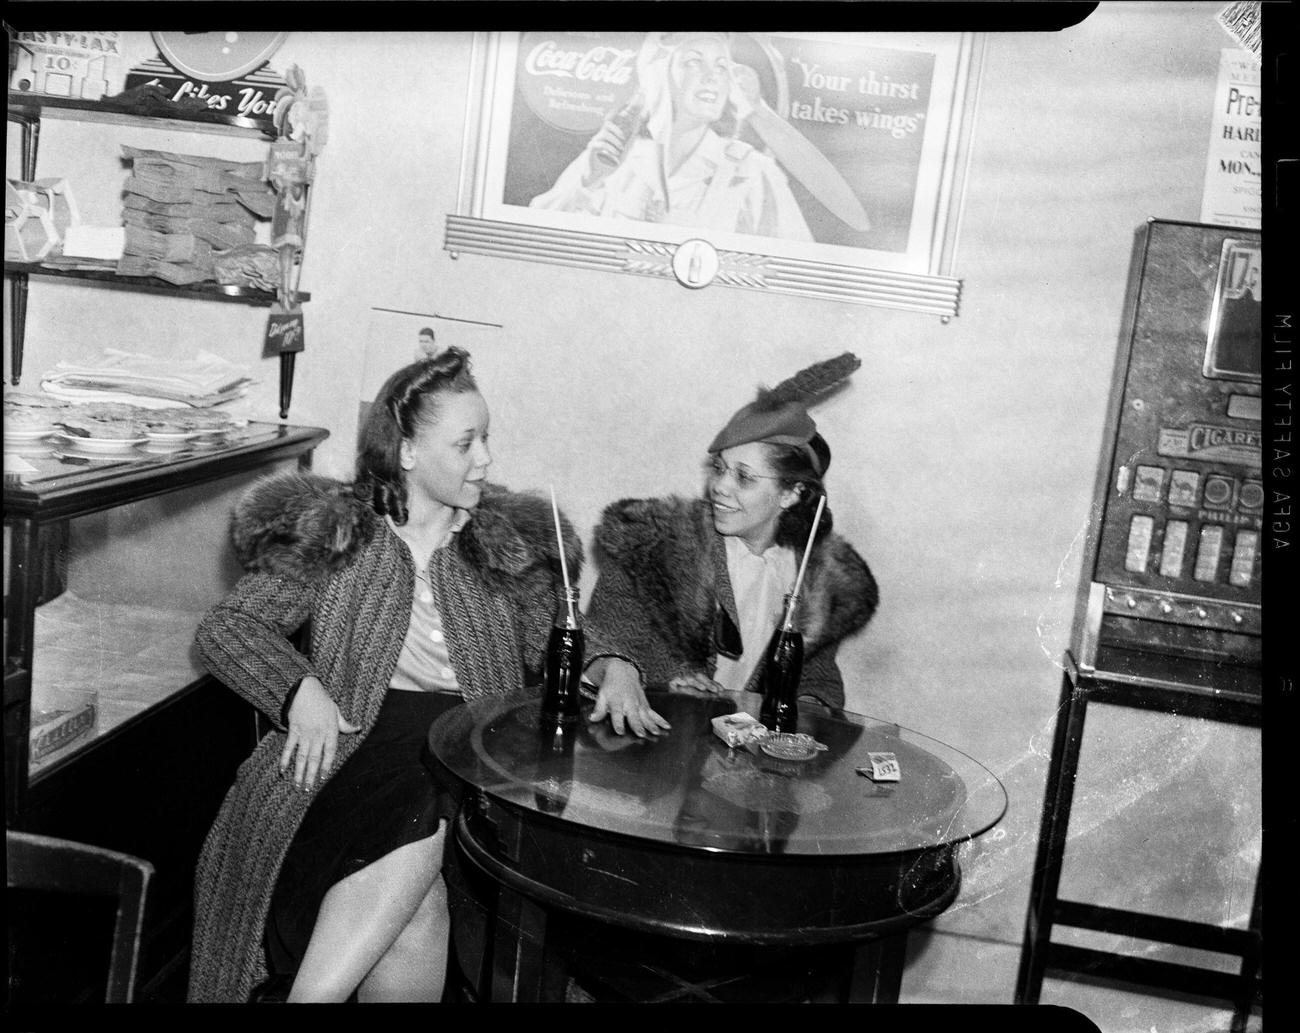 Ella Mae Lacey and Myrtle Thomas with Coca-Cola bottles in Lincoln Lunch Restaurant, Washington, Pennsylvania, March 1941.